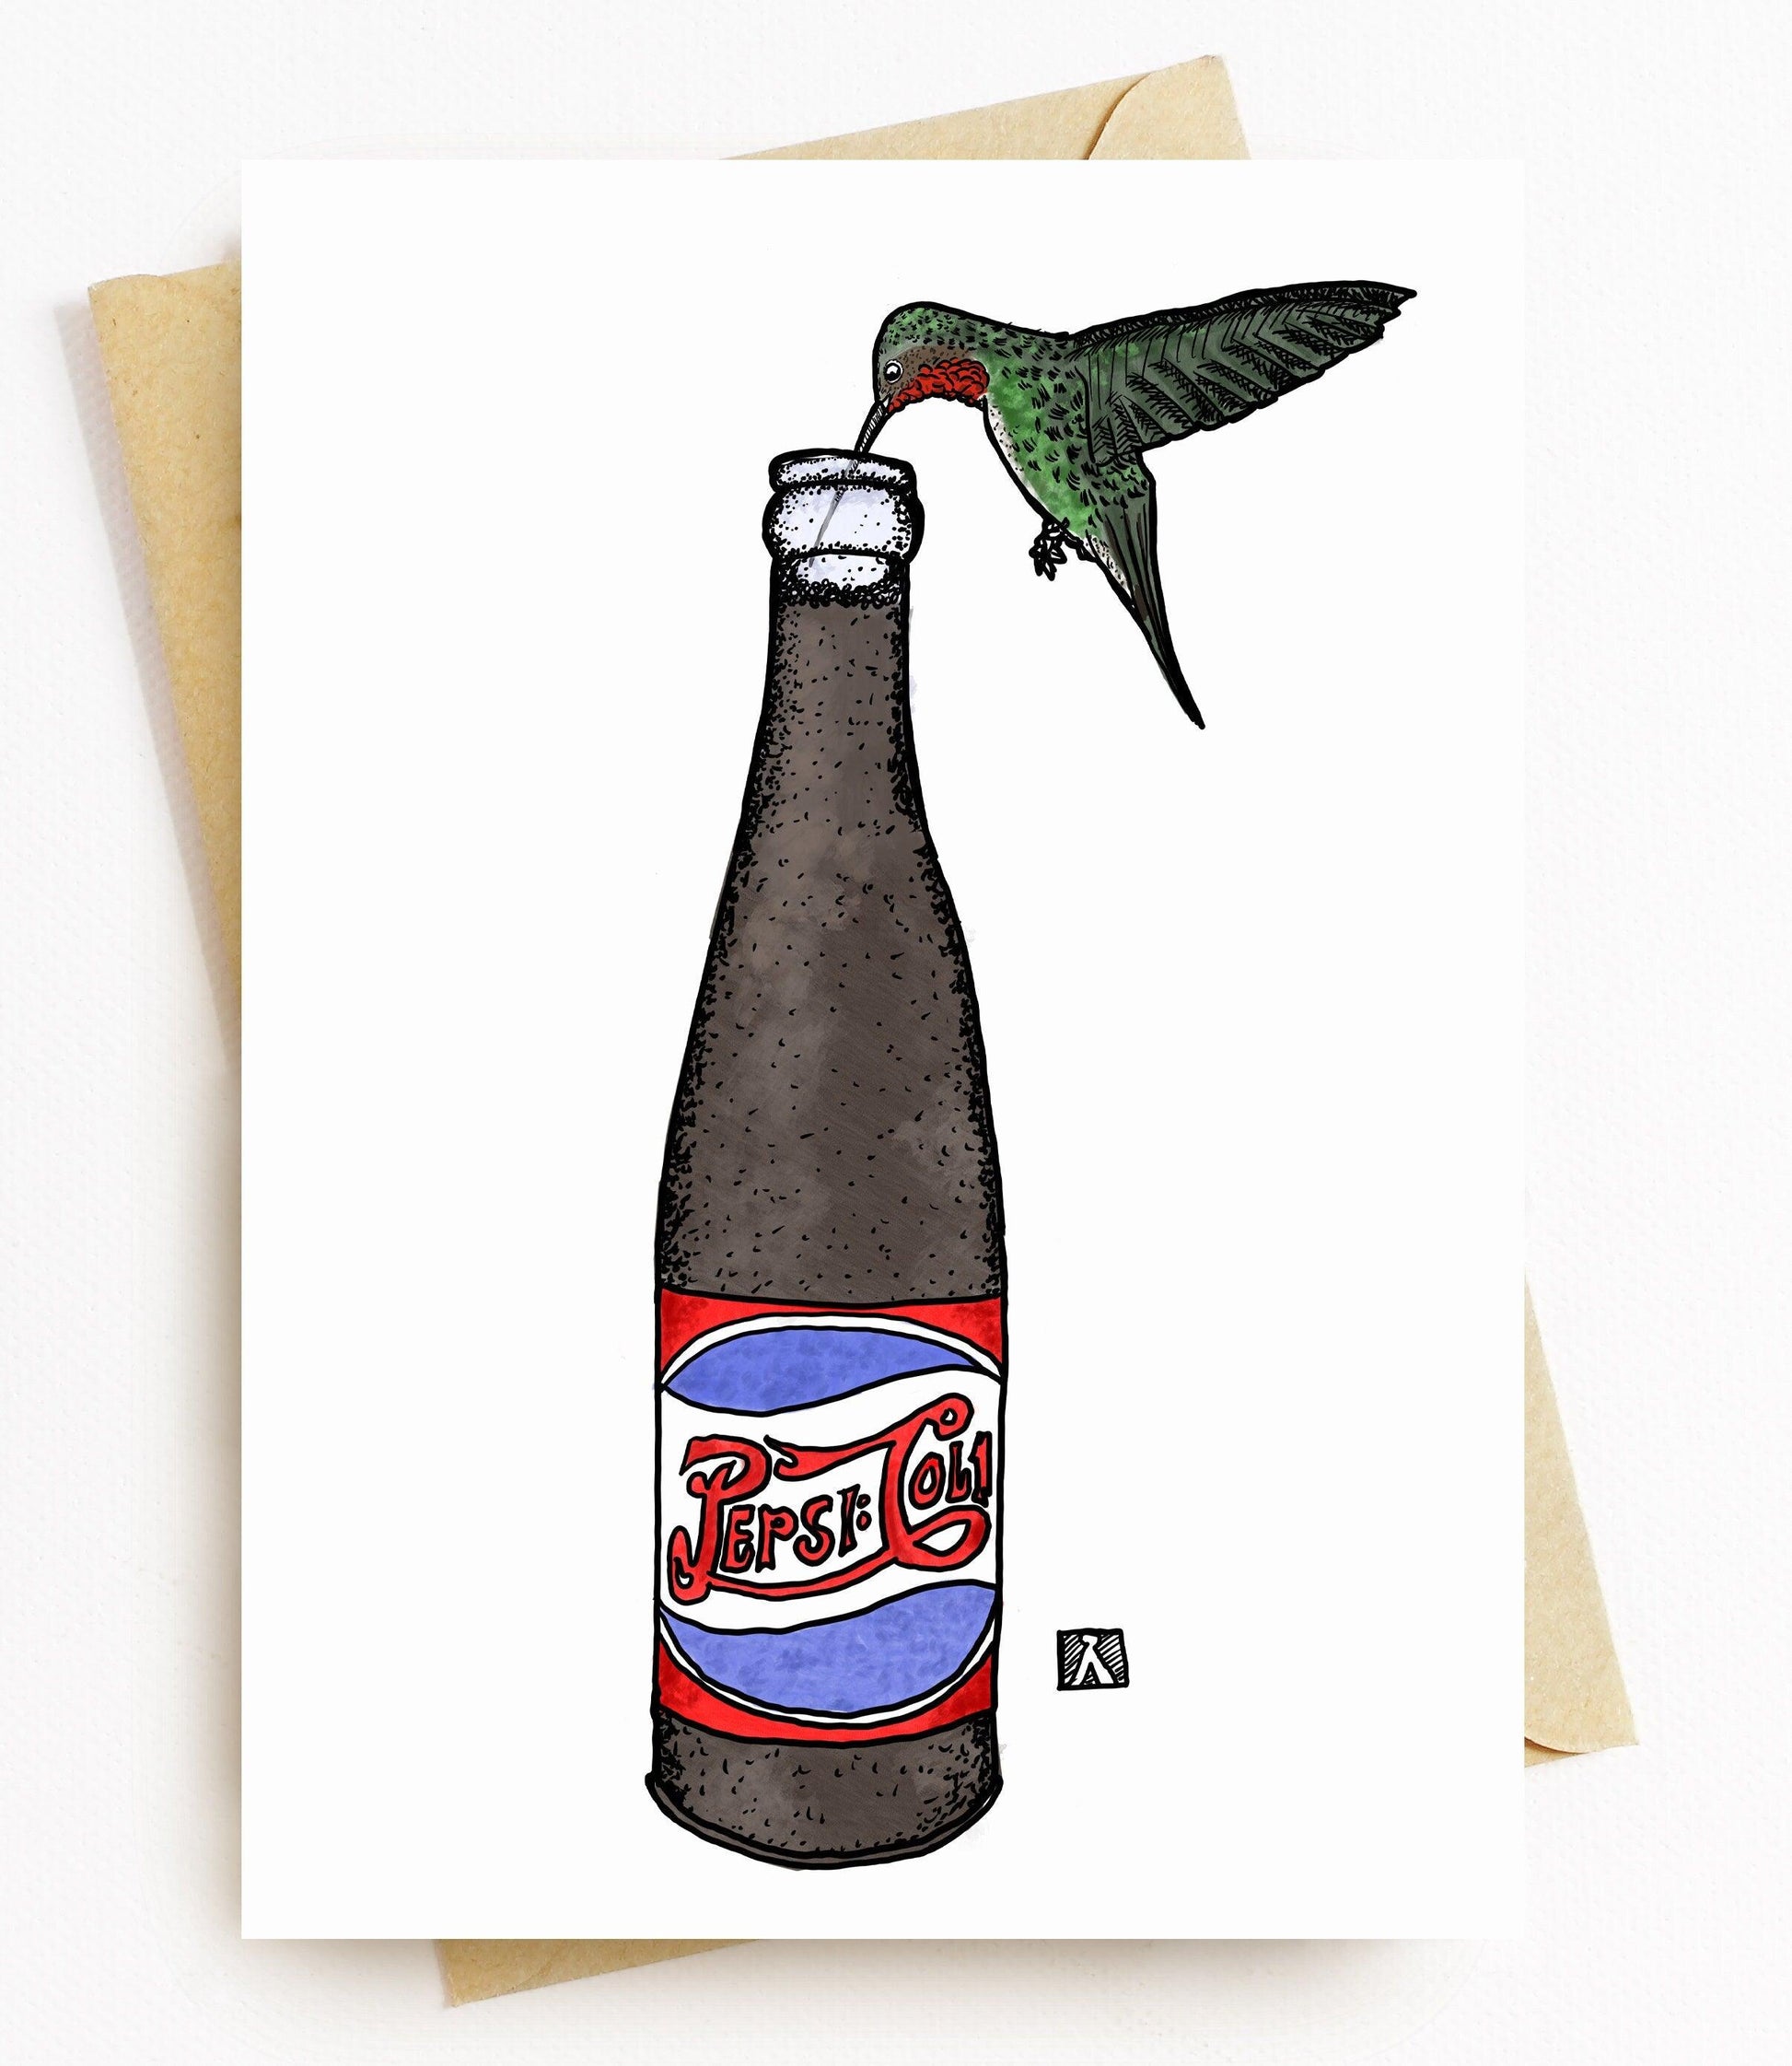 BellavanceInk: Greeting Card With Humming Bird Drinking From A Bottle Of Soda Pen & Ink Watercolor Illustration 5 x 7 Inches - BellavanceInk